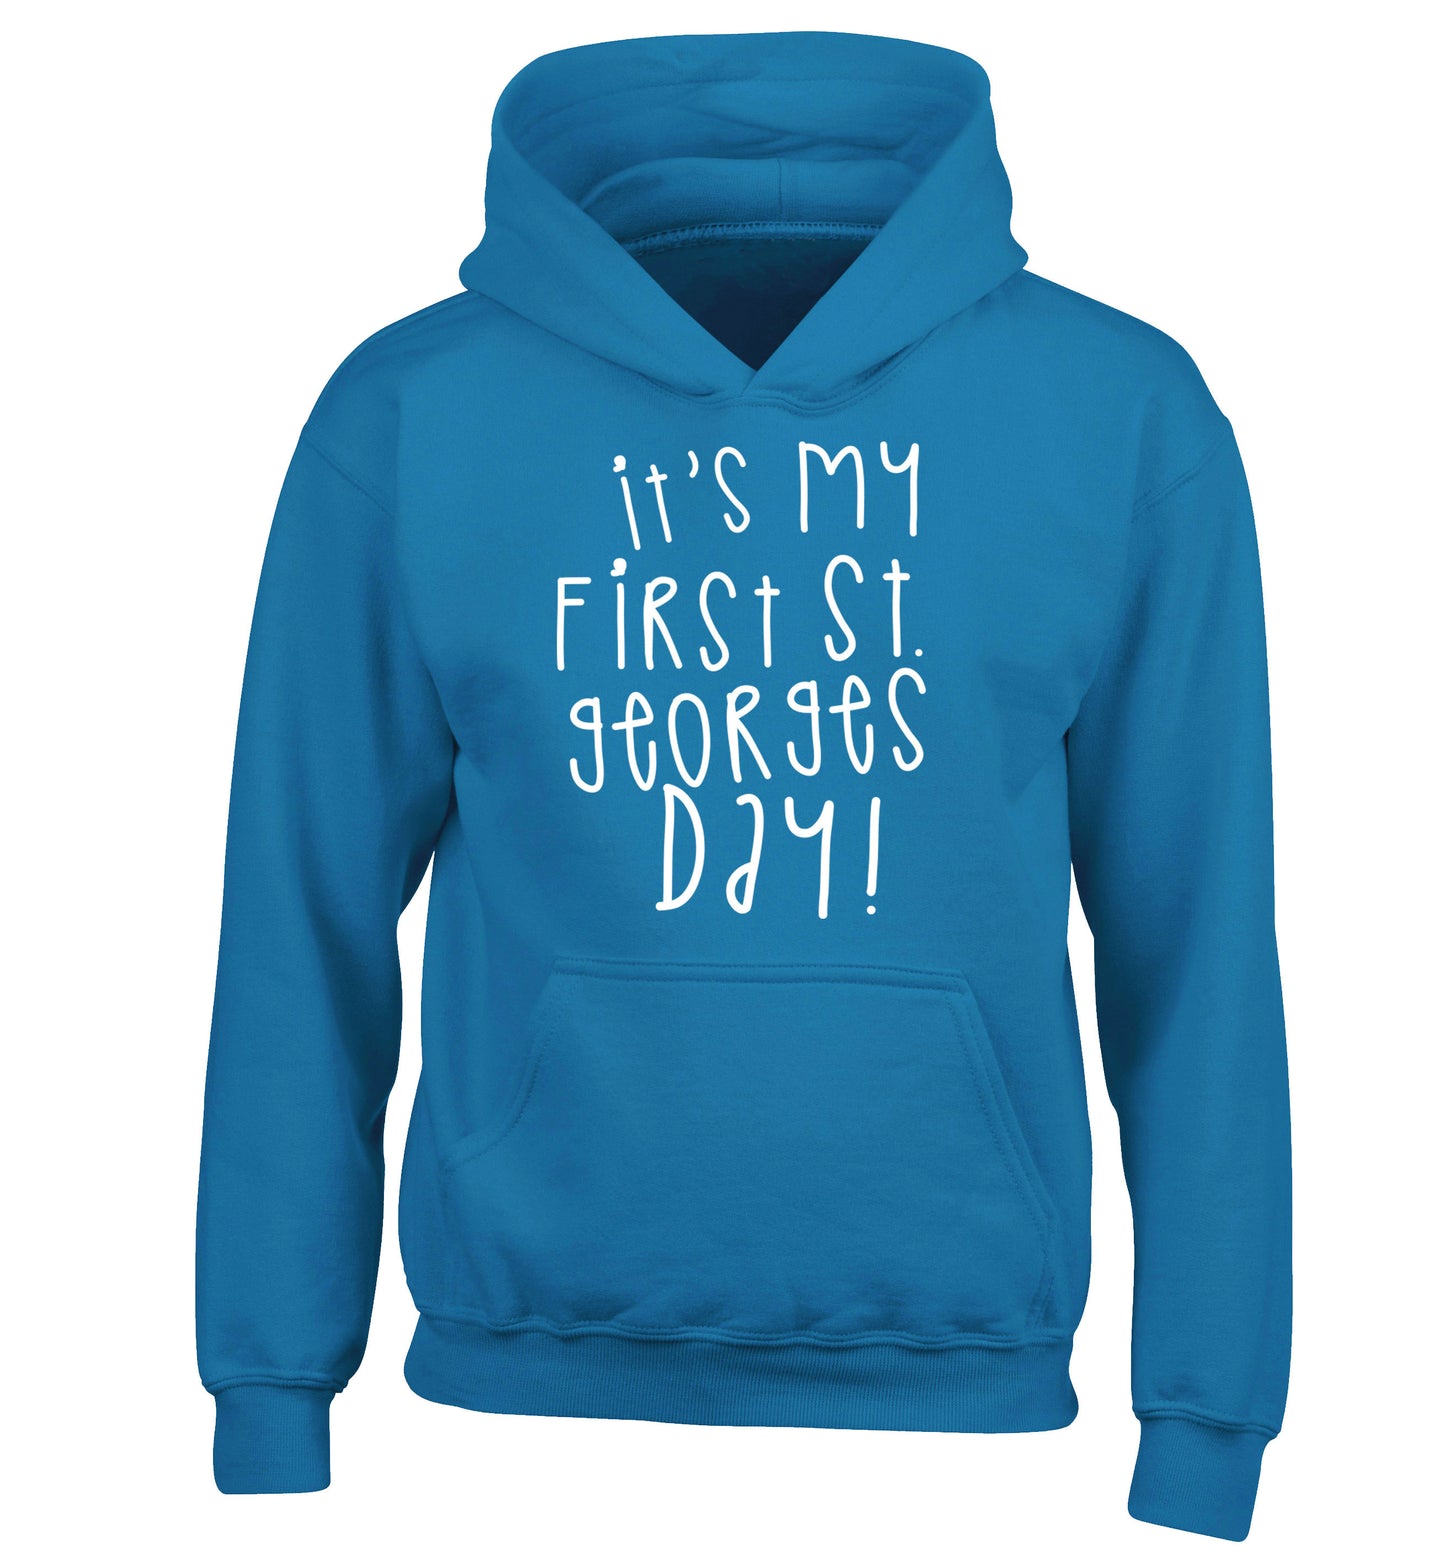 It's my first St Georges day children's blue hoodie 12-14 Years